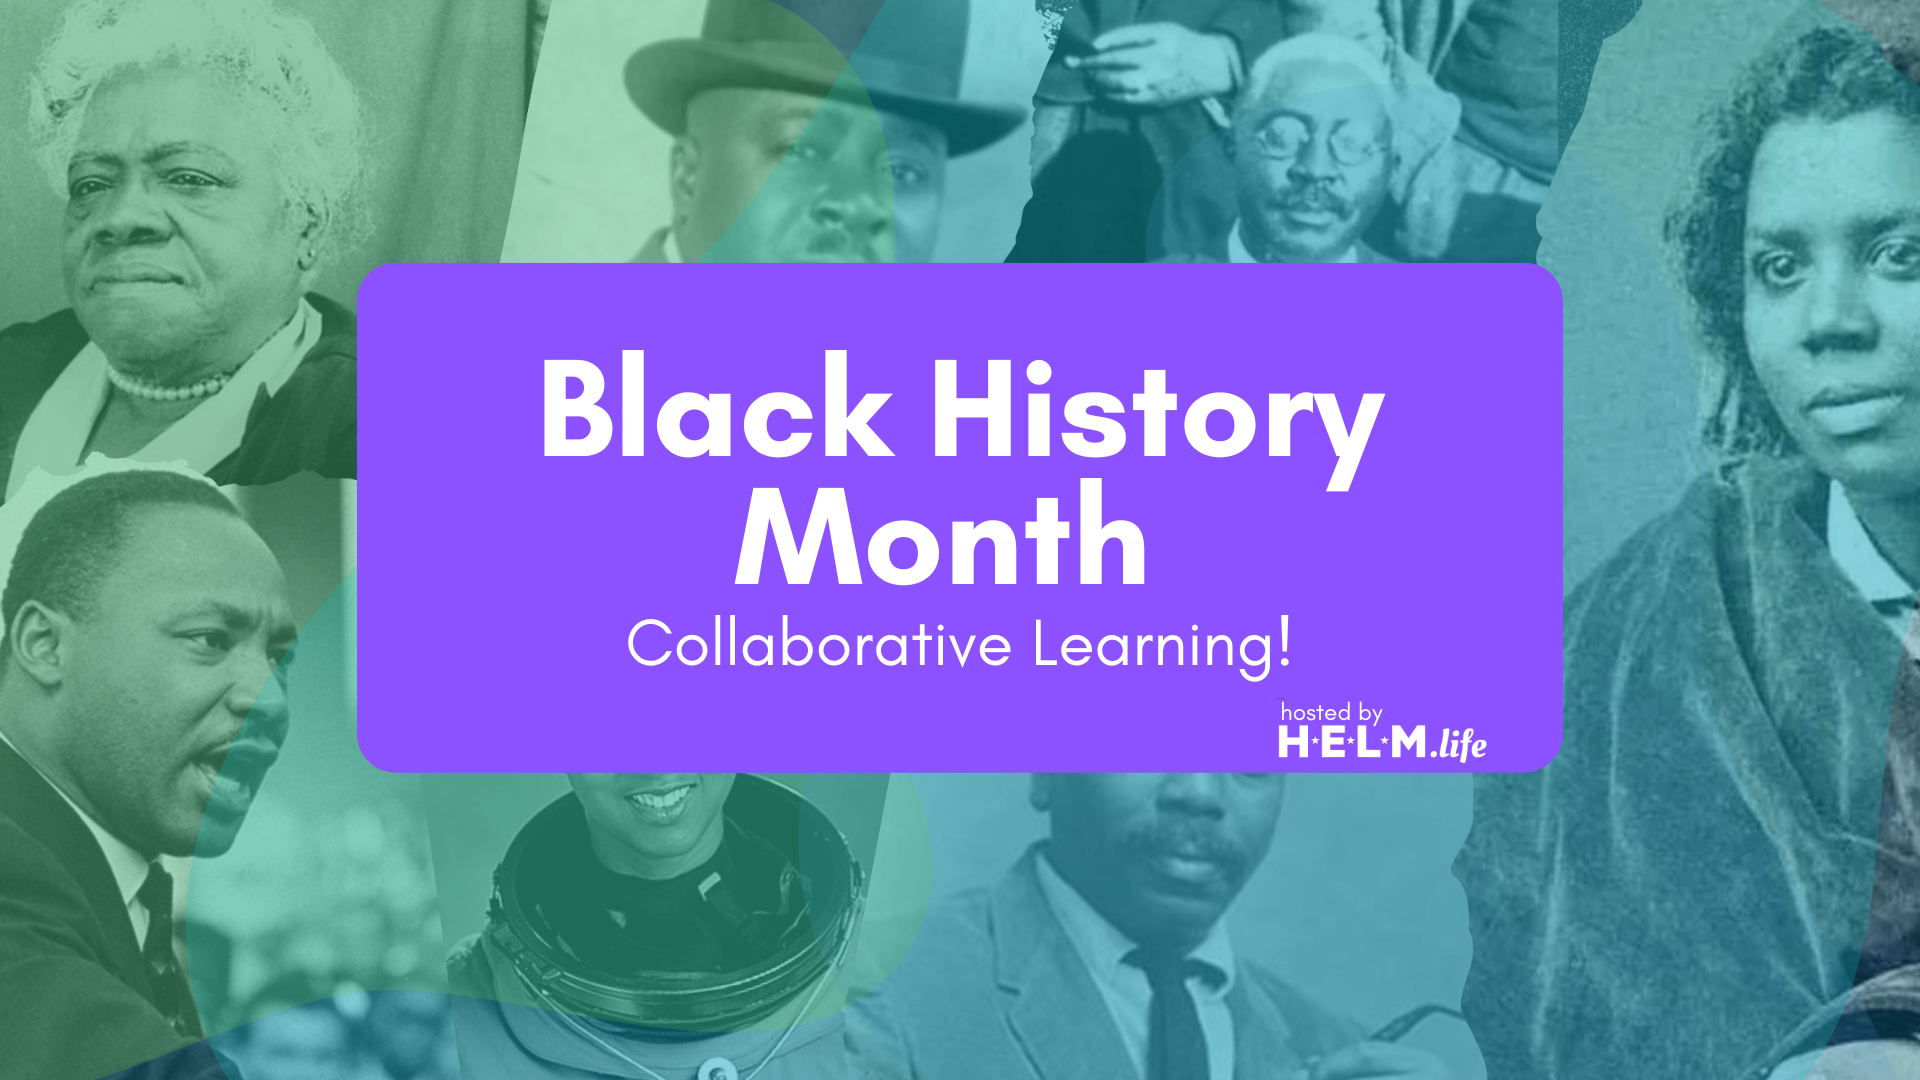 HELM Life History Month